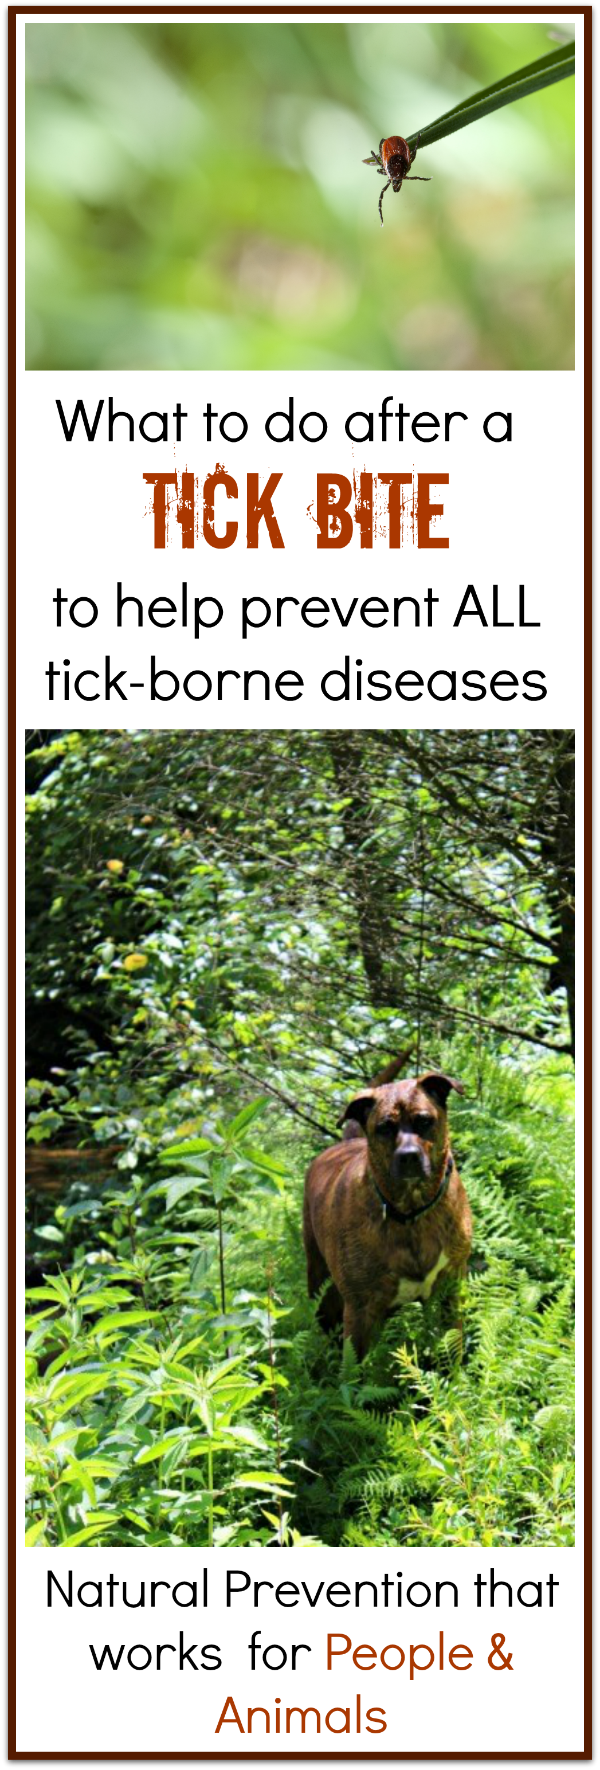 This is one natural remedy that you need for tick bites to help prevent all tick borne diseases including Lyme and Rocky Mountain Spotted fever. Works for people and animals. I always take this with me when I go camping just in case.